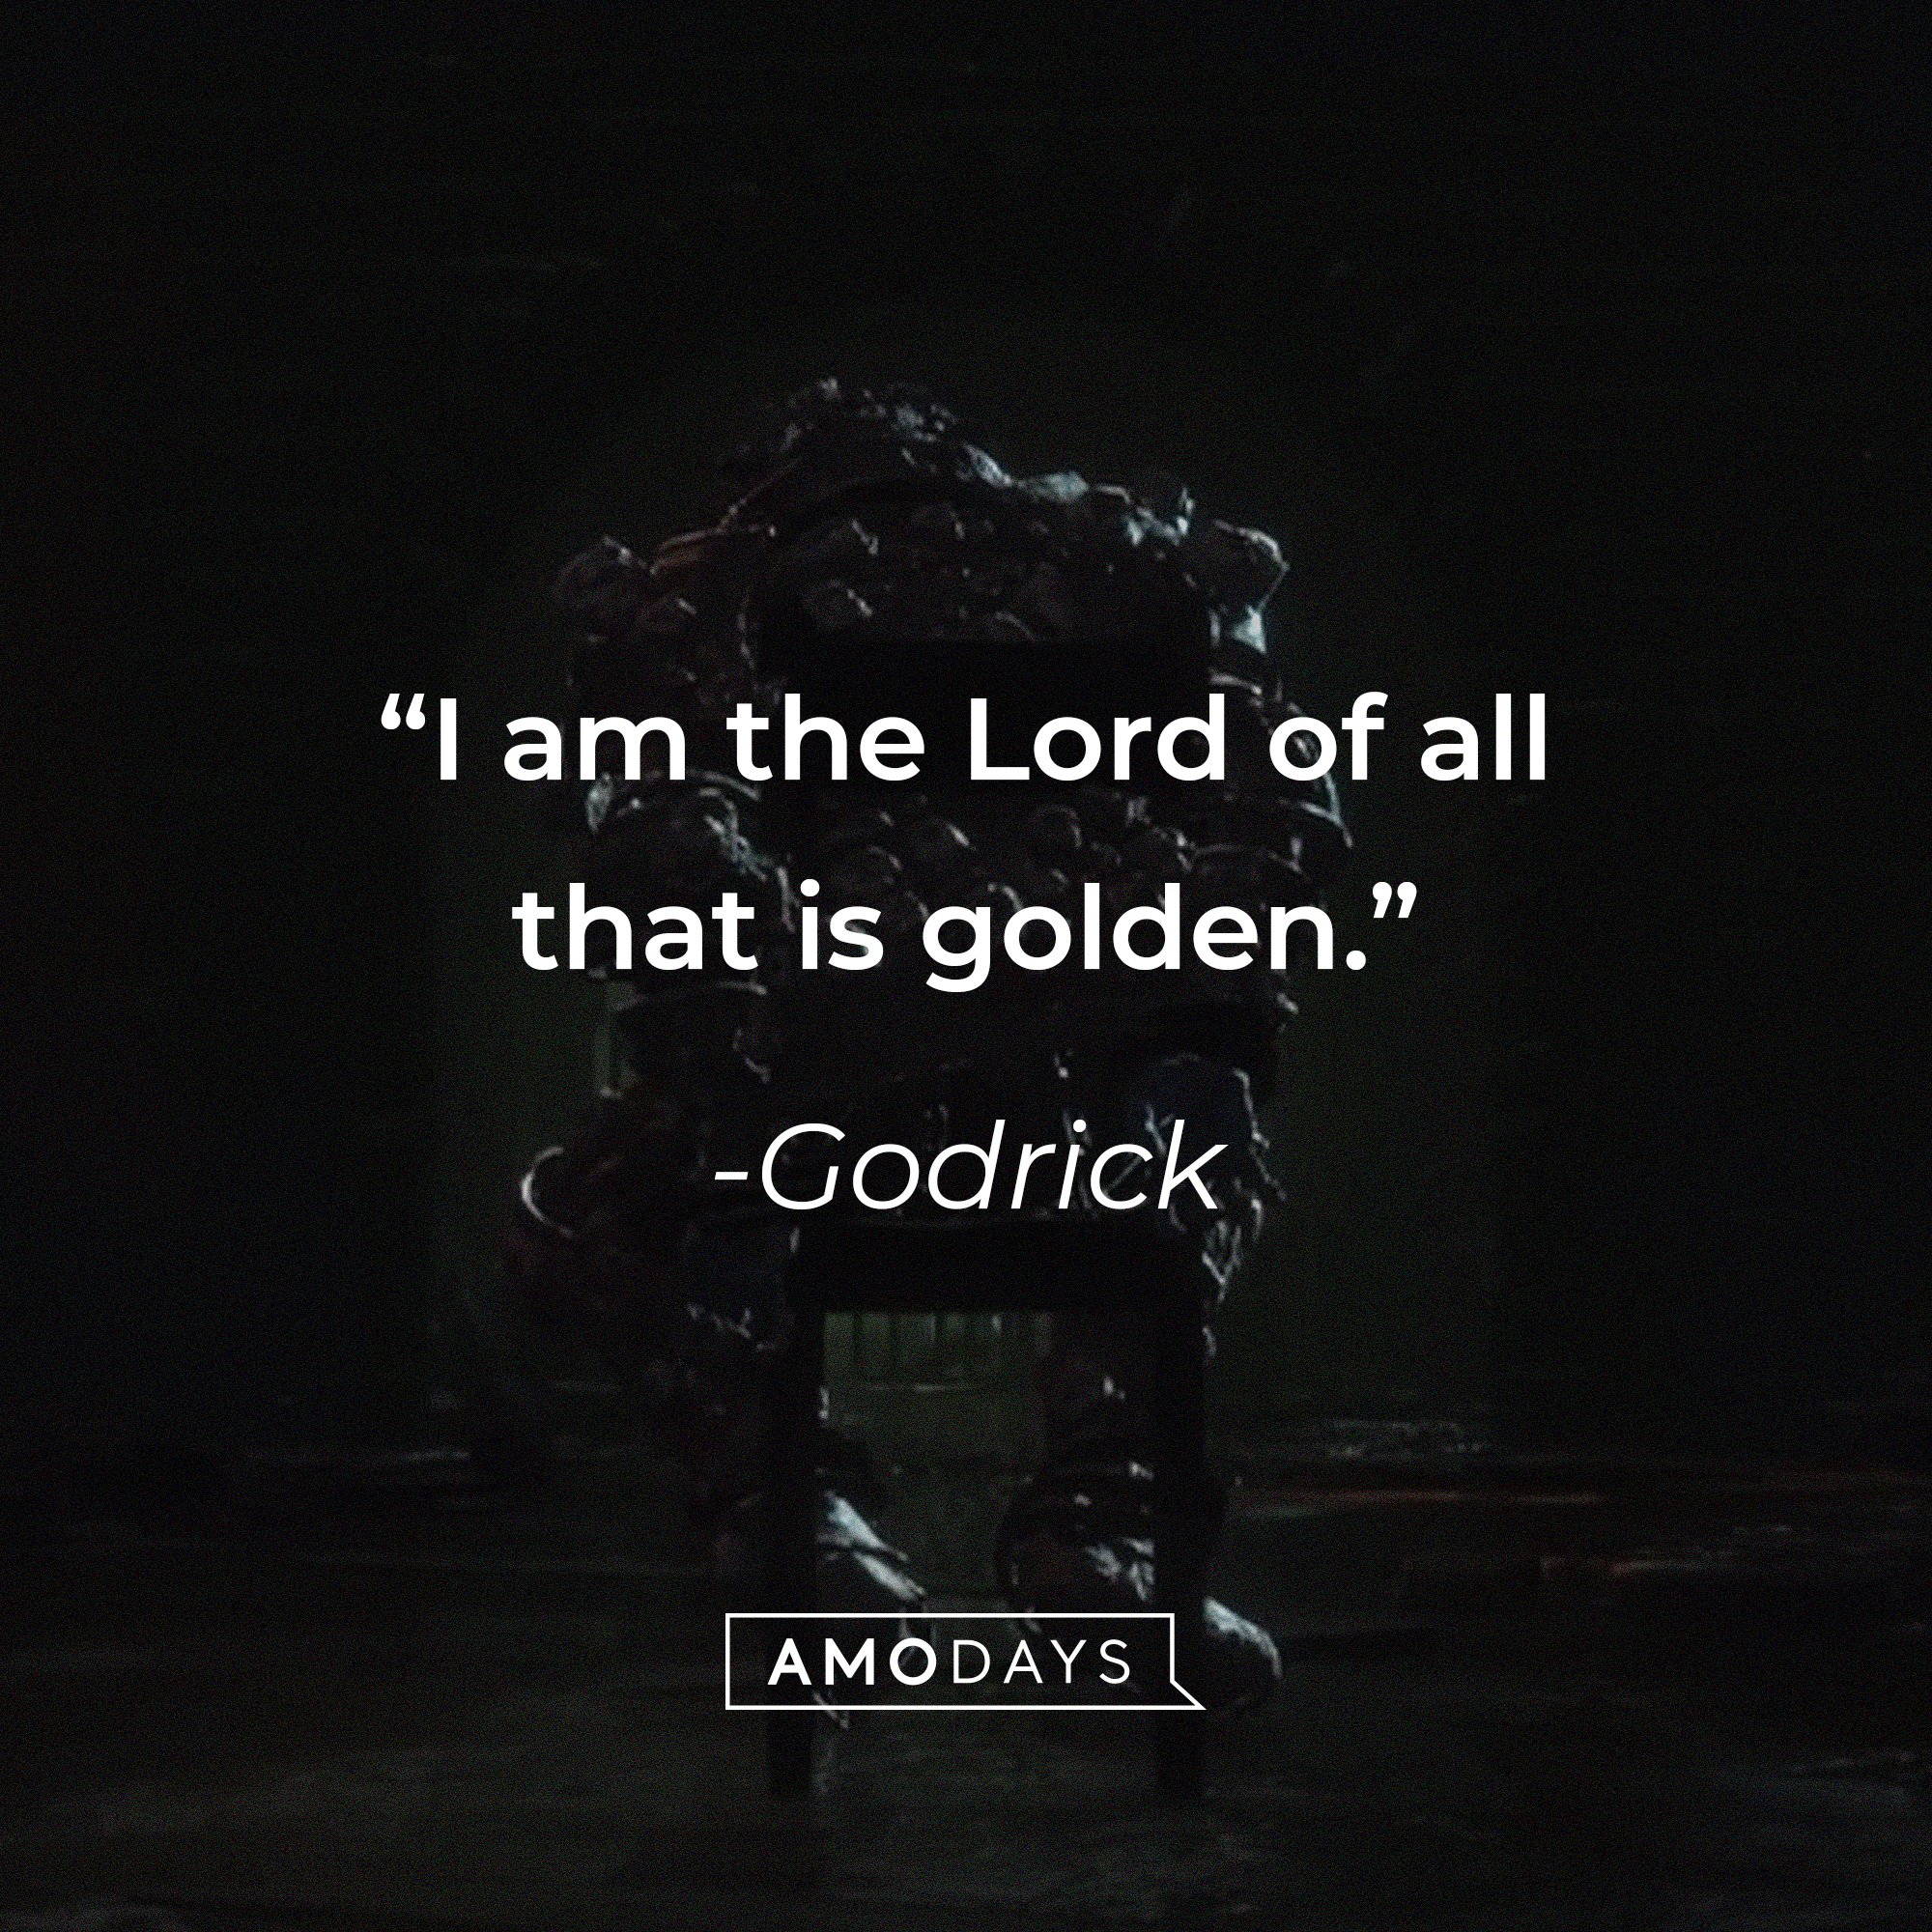 Godrick’s quote: "I am the Lord of all that is golden." | Image: AmoDays